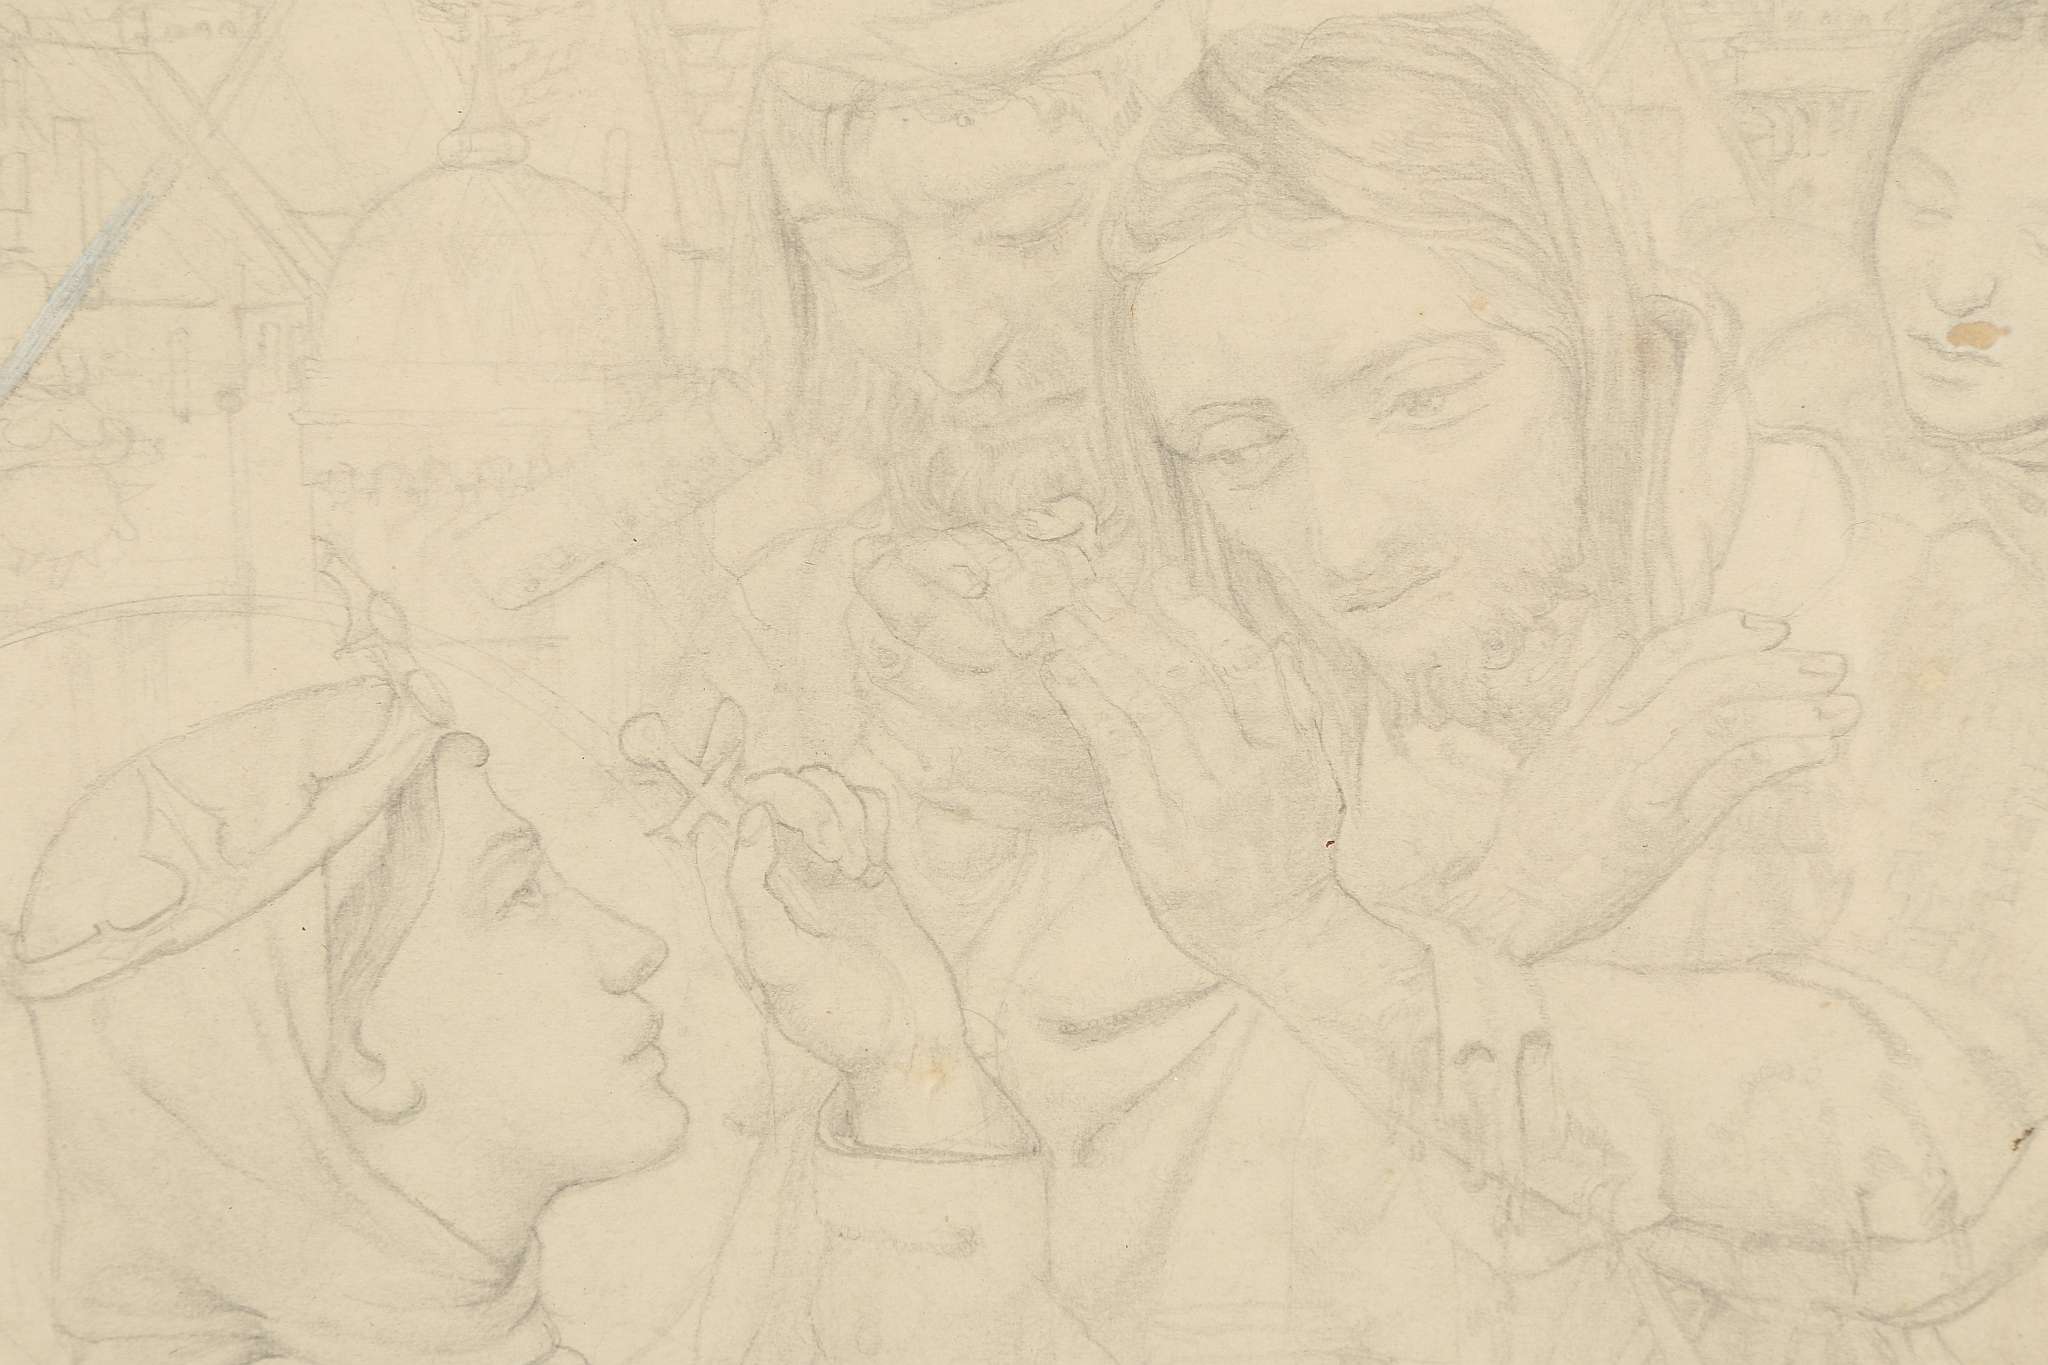 Noel Laura Nisbet R.I. 1881-1956, 'The Blessing', pencil with studio secession stamp lower right, - Image 4 of 8